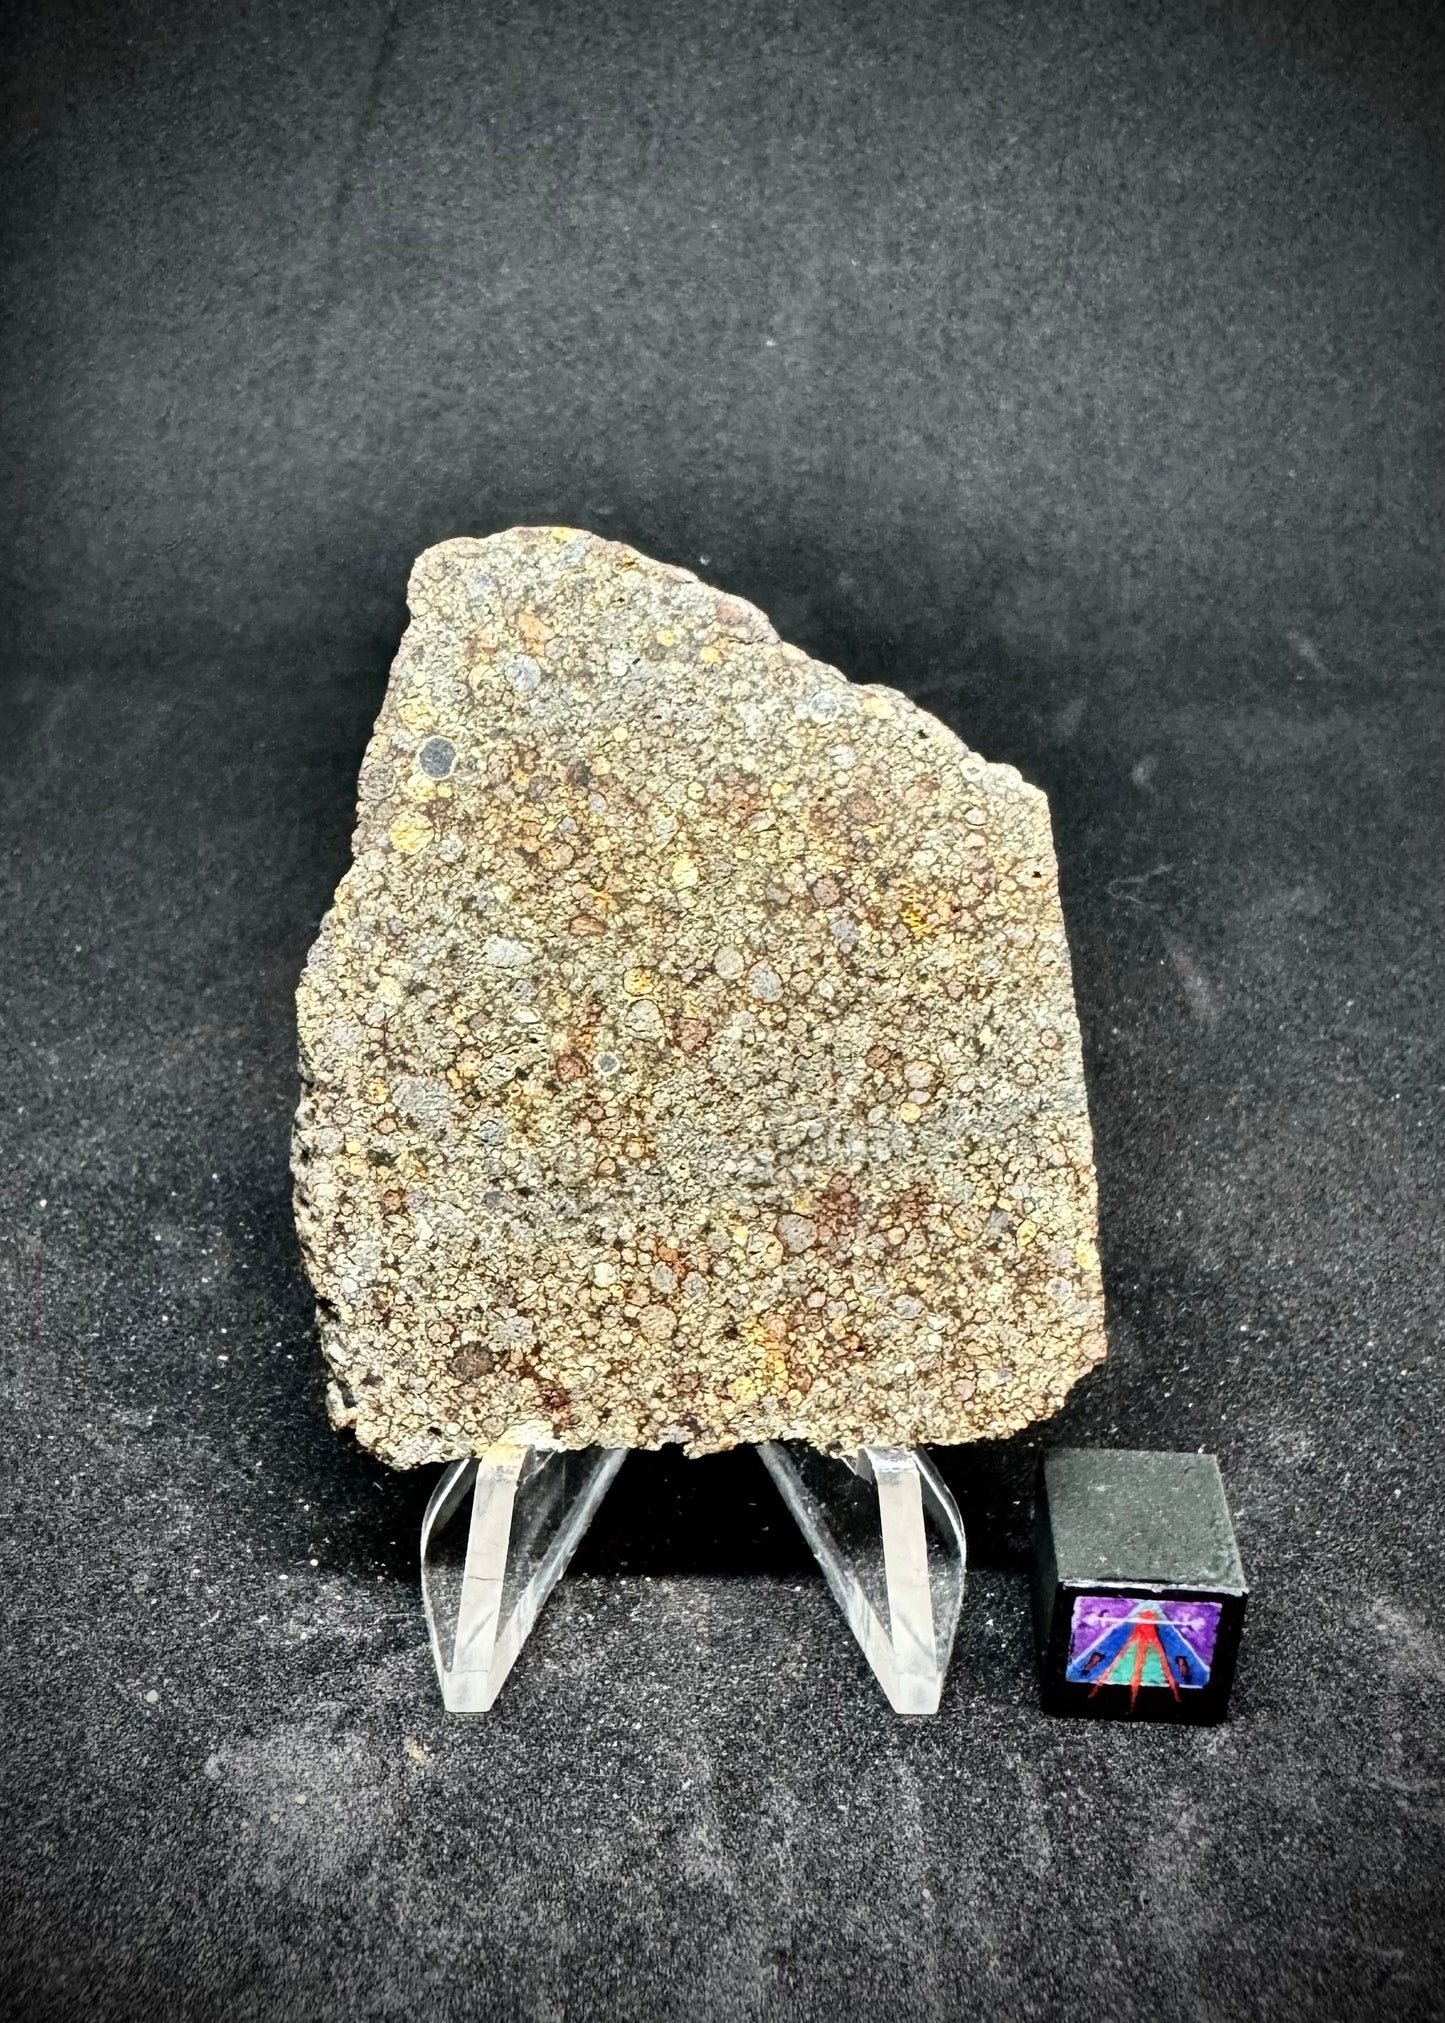 NWA 8007 - A Stunning Ordinary Chondrite Packed With Chondrules